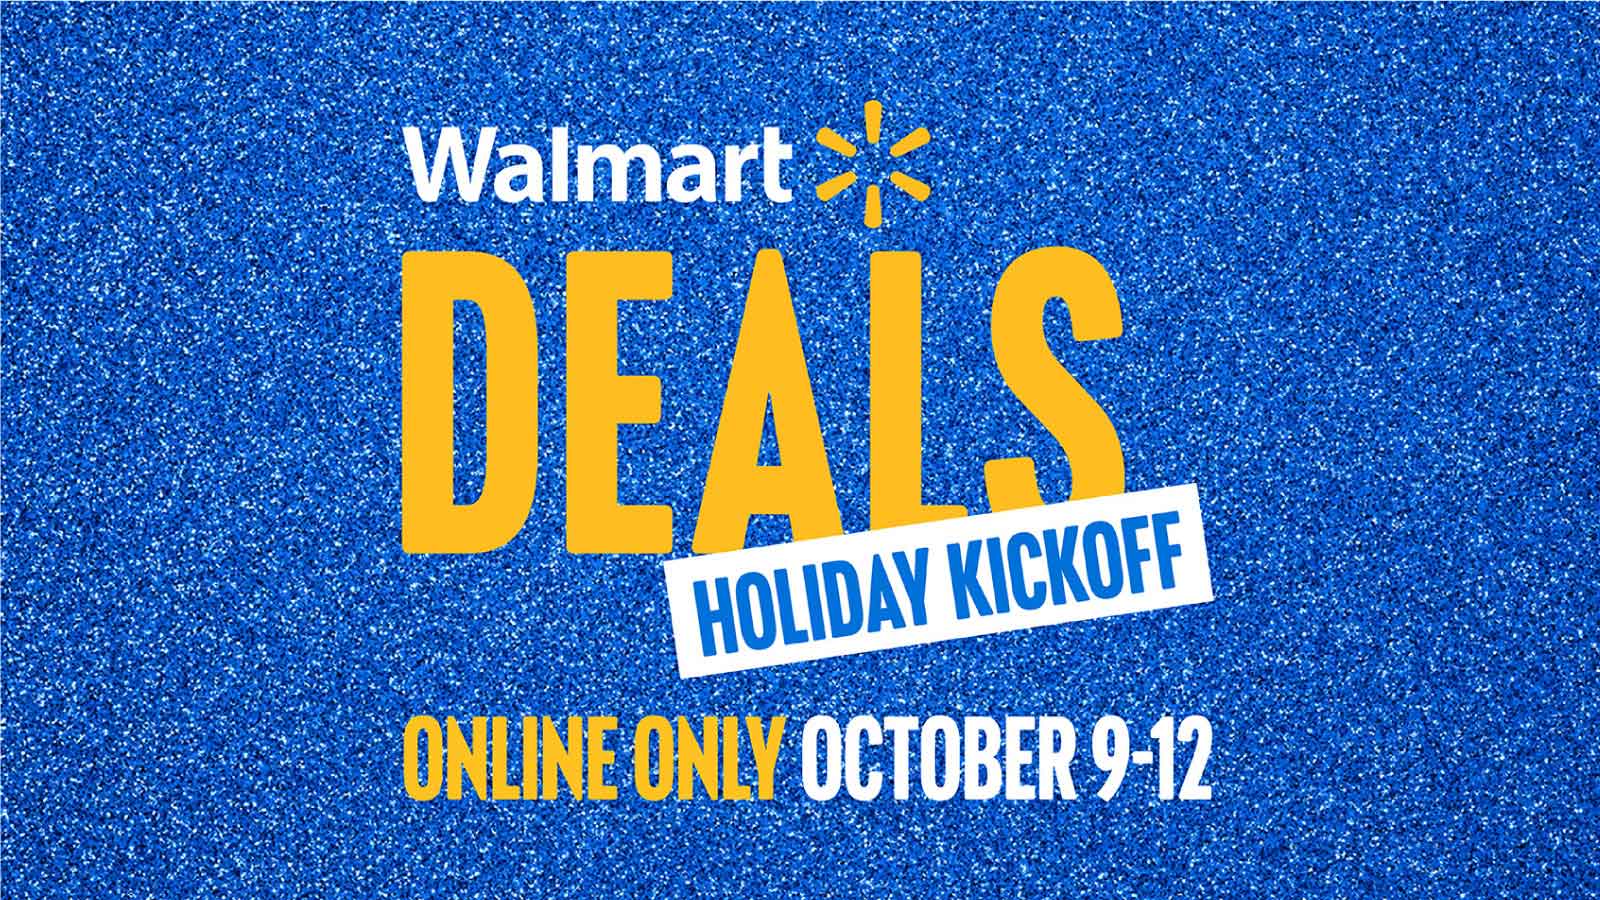 Walmart's “Black Friday Deals for Days” Returns With More Savings